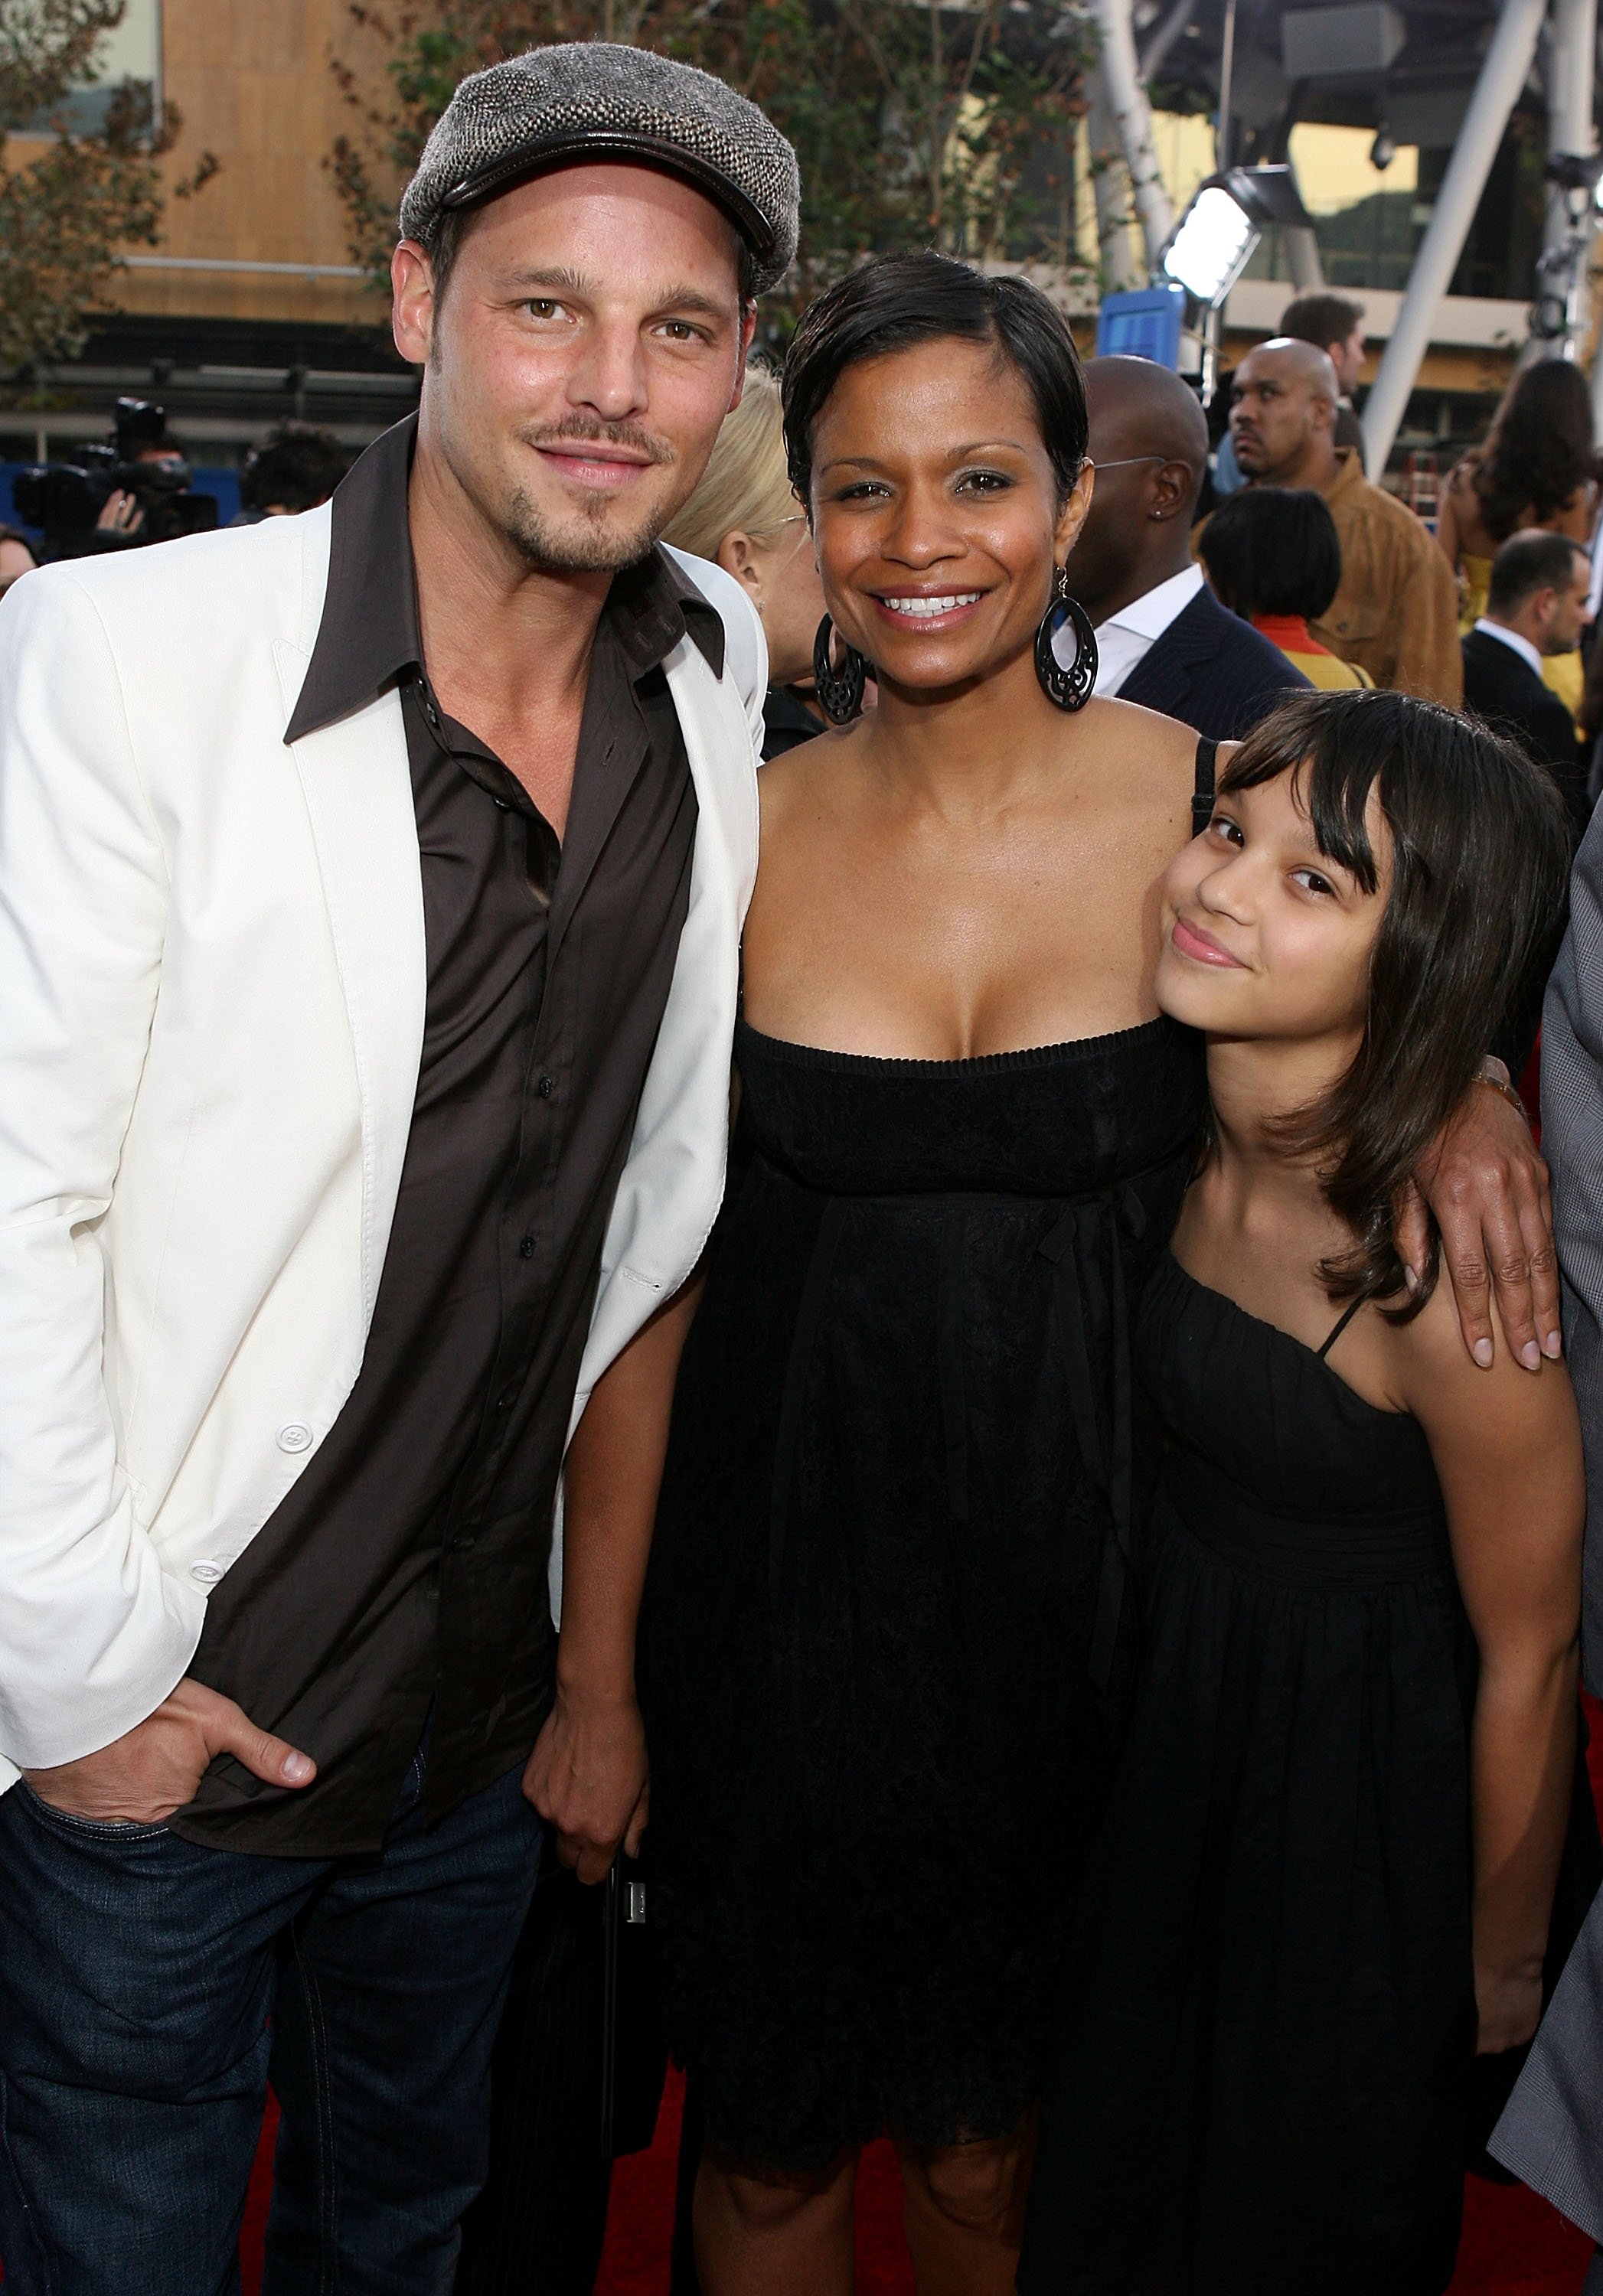 Actor Justin Chambers, wife Keisha Chambers, and daughter arrive at the 2007 American Music Awards held at the Nokia Theatre L.A. LIVE on November 18, 2007 | Source: Getty Images